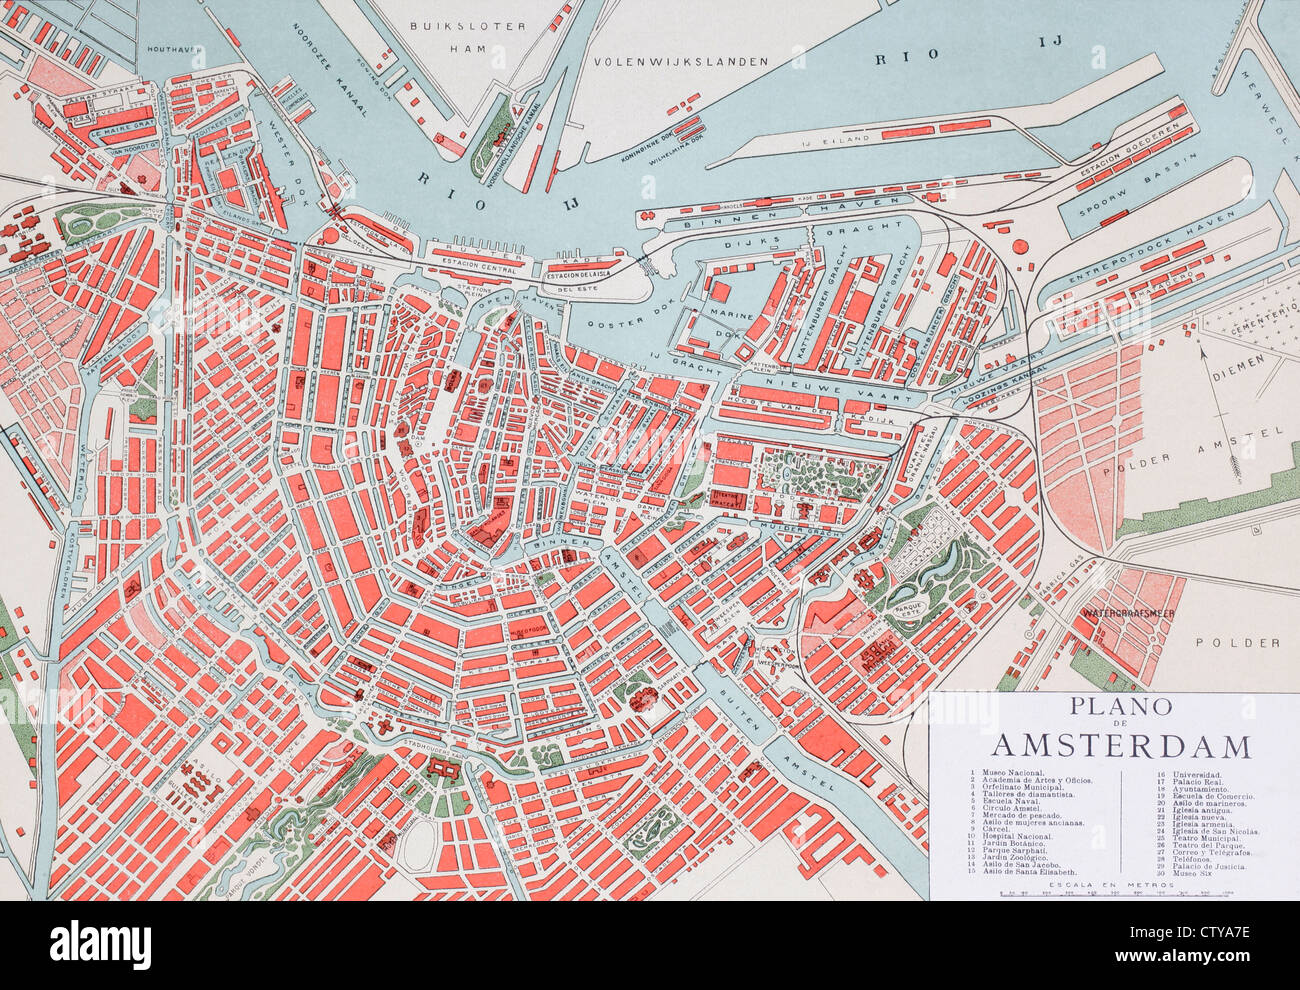 Plan of Amsterdam, Holland, at the turn of the 20th century. Map is edited in Spanish language. Stock Photo